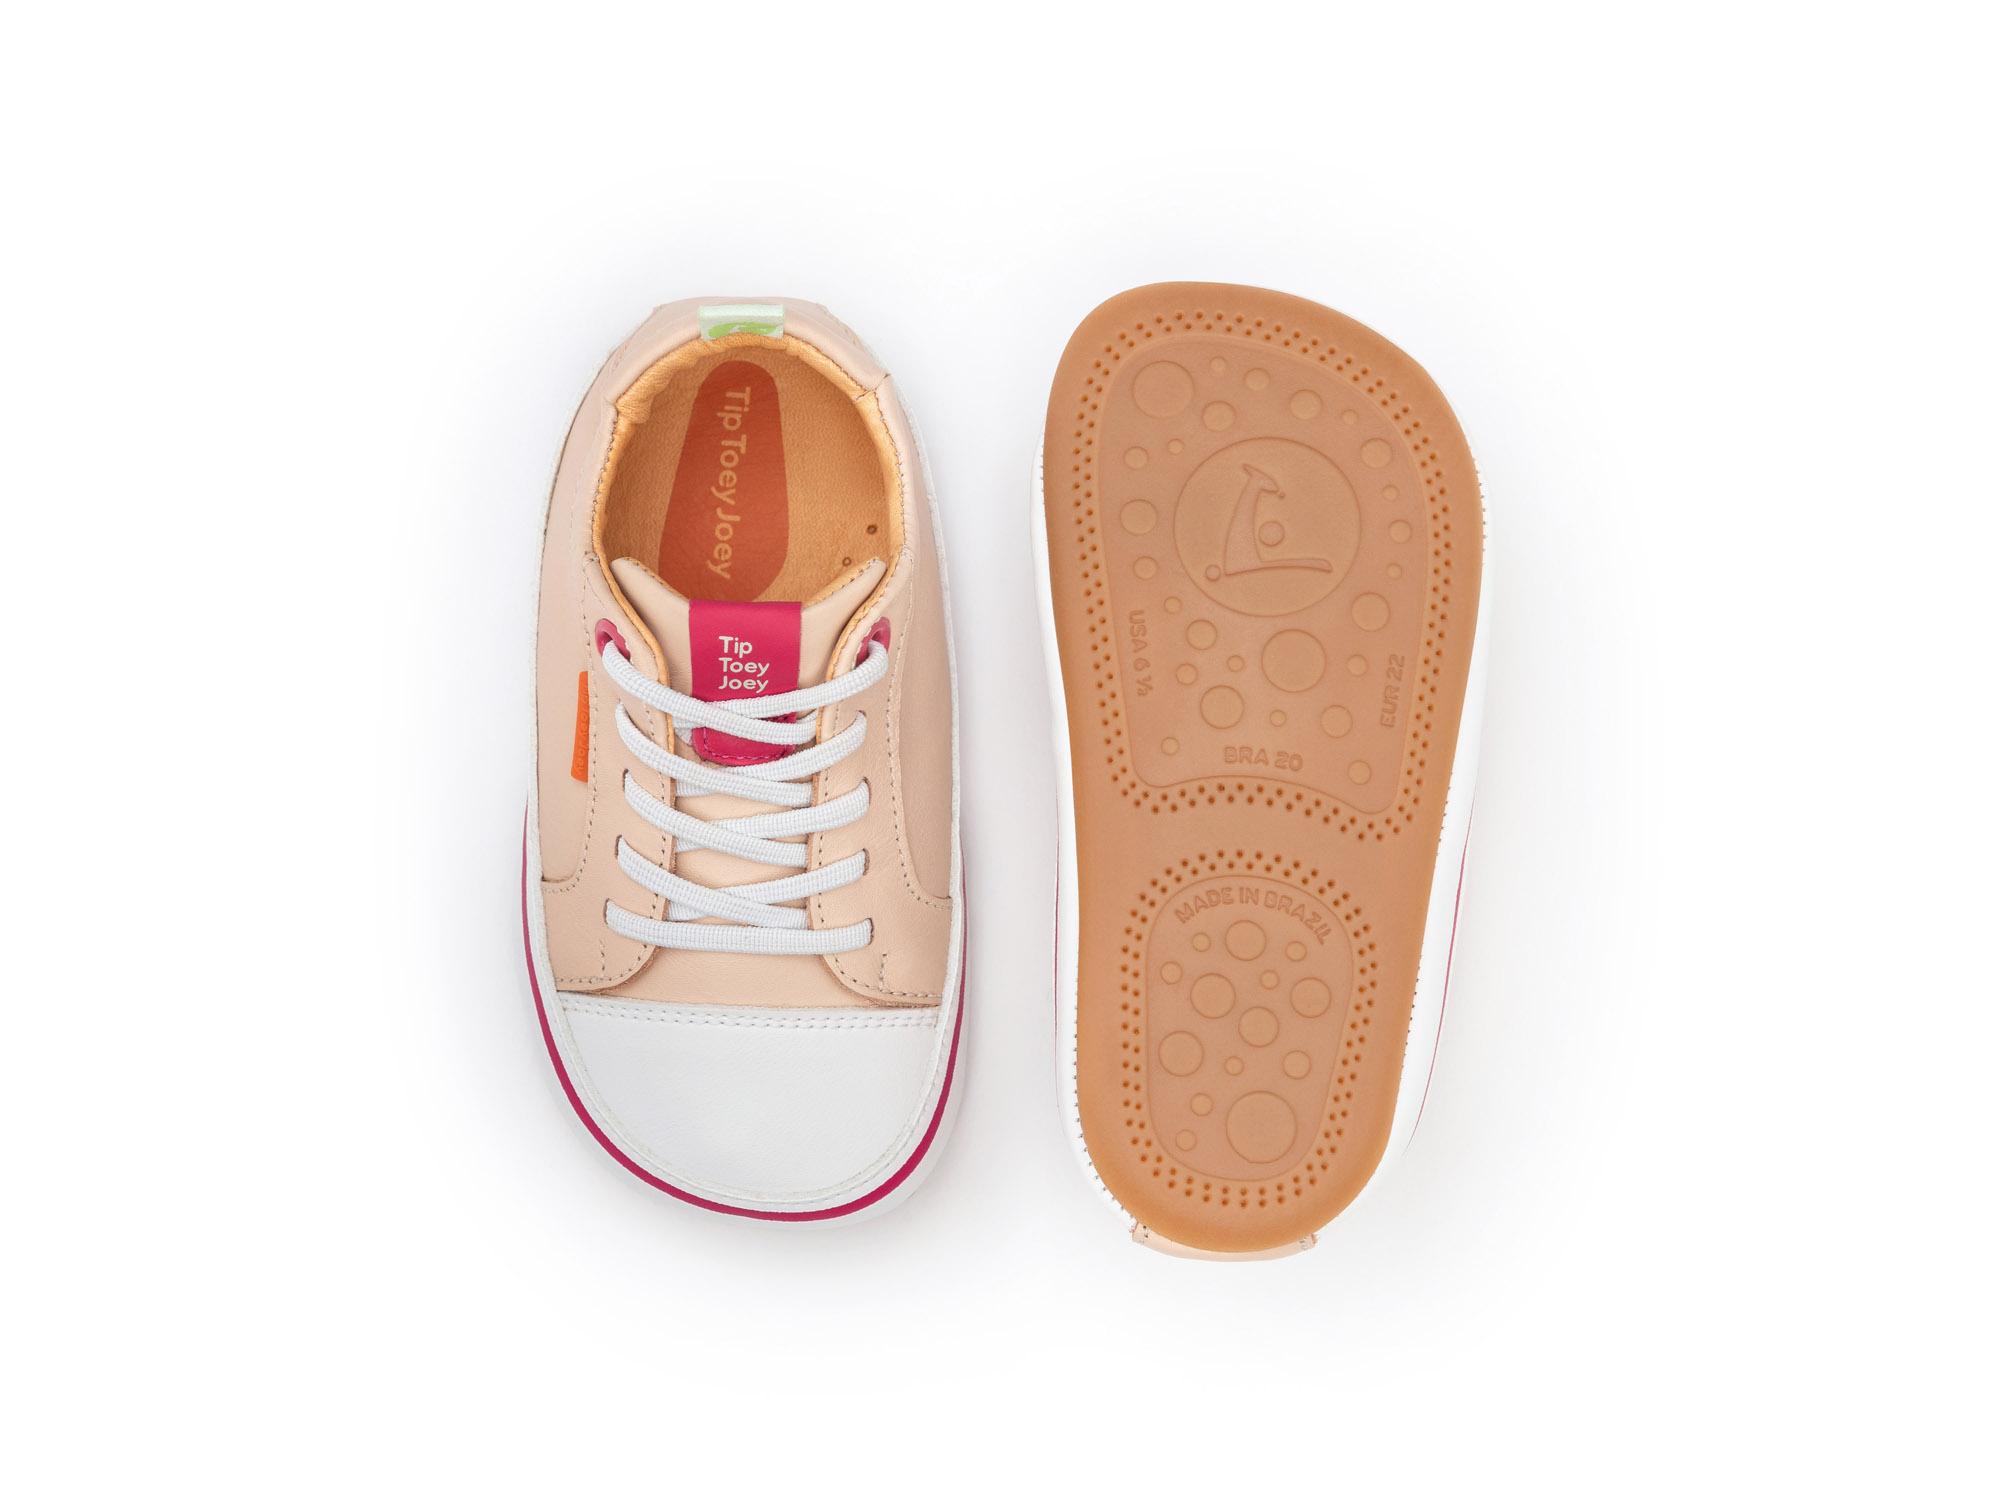 UP & GO Sneakers for Girls Funky Colors | Tip Toey Joey - Australia - 2